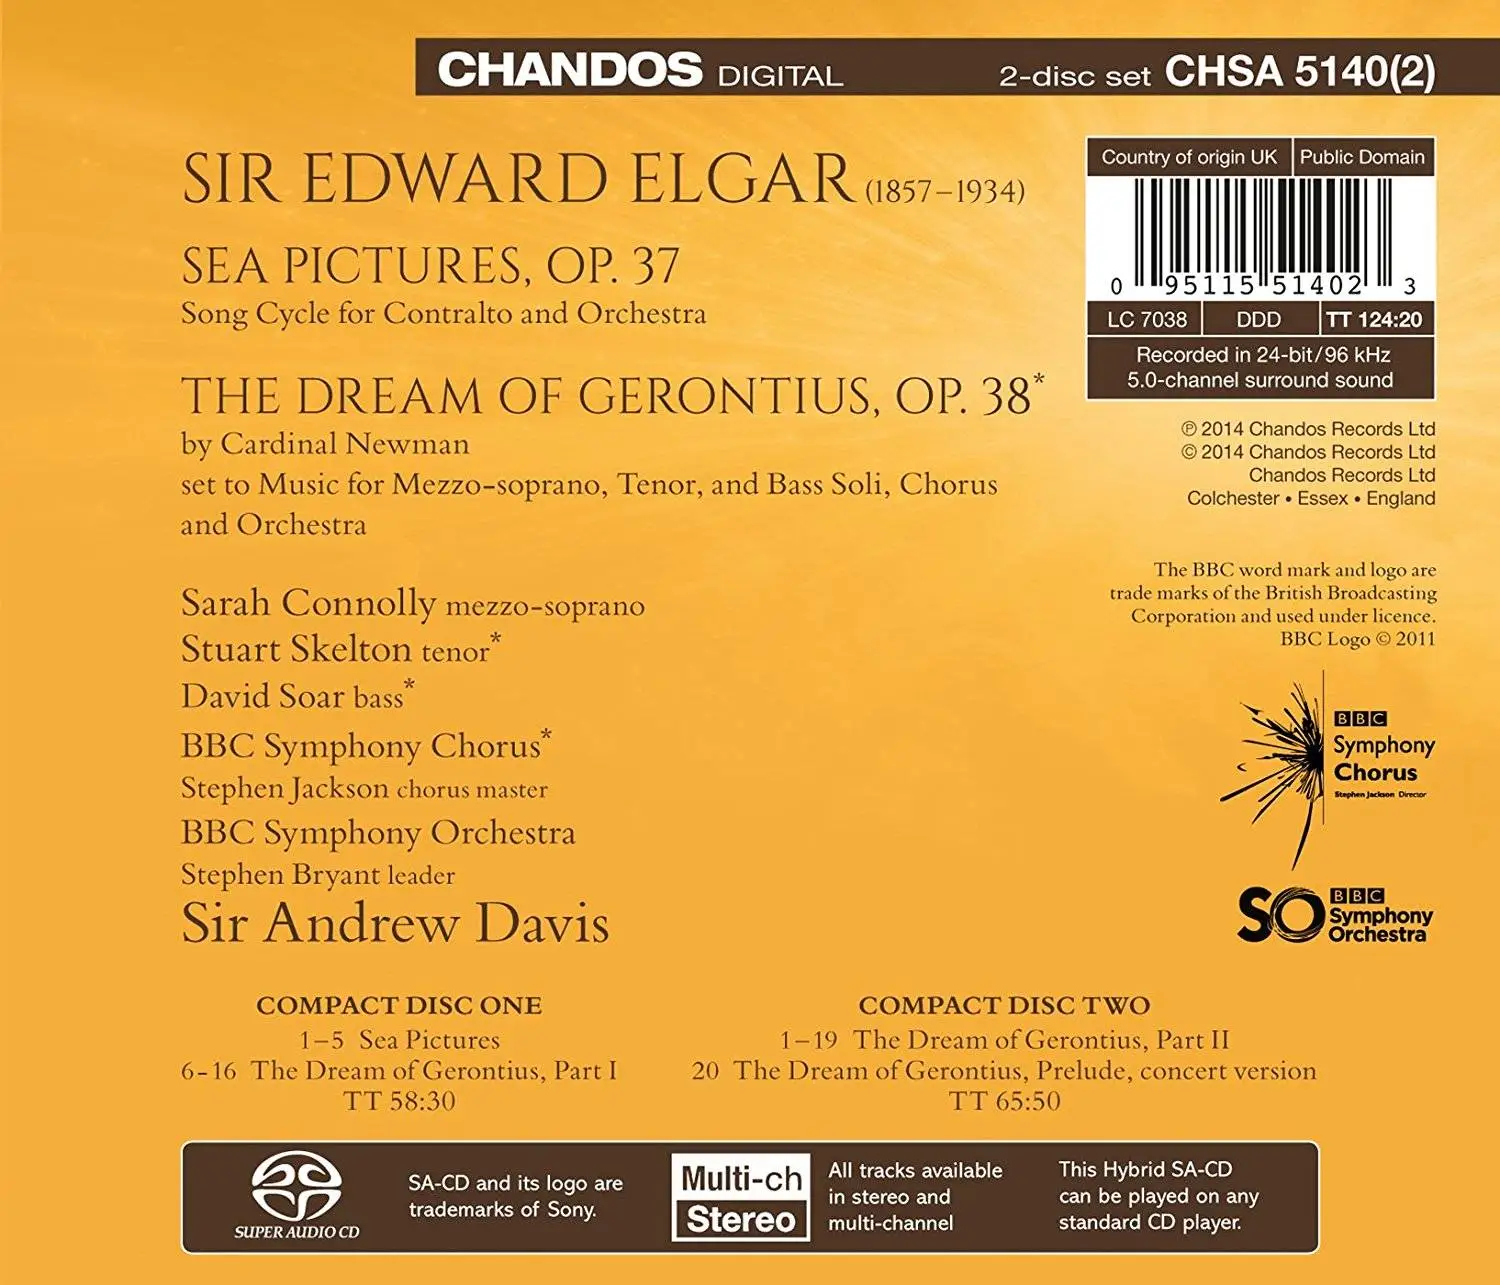 Bbc symphony orchestra. Foreigner - with the 21st Century Symphony Orchestra & Chorus (2018). SACD Chandos Stanford - Orchestral Songs Finley bbc Finley Baritone. SACD Chandos Stanford Revenge Hickox bbc.